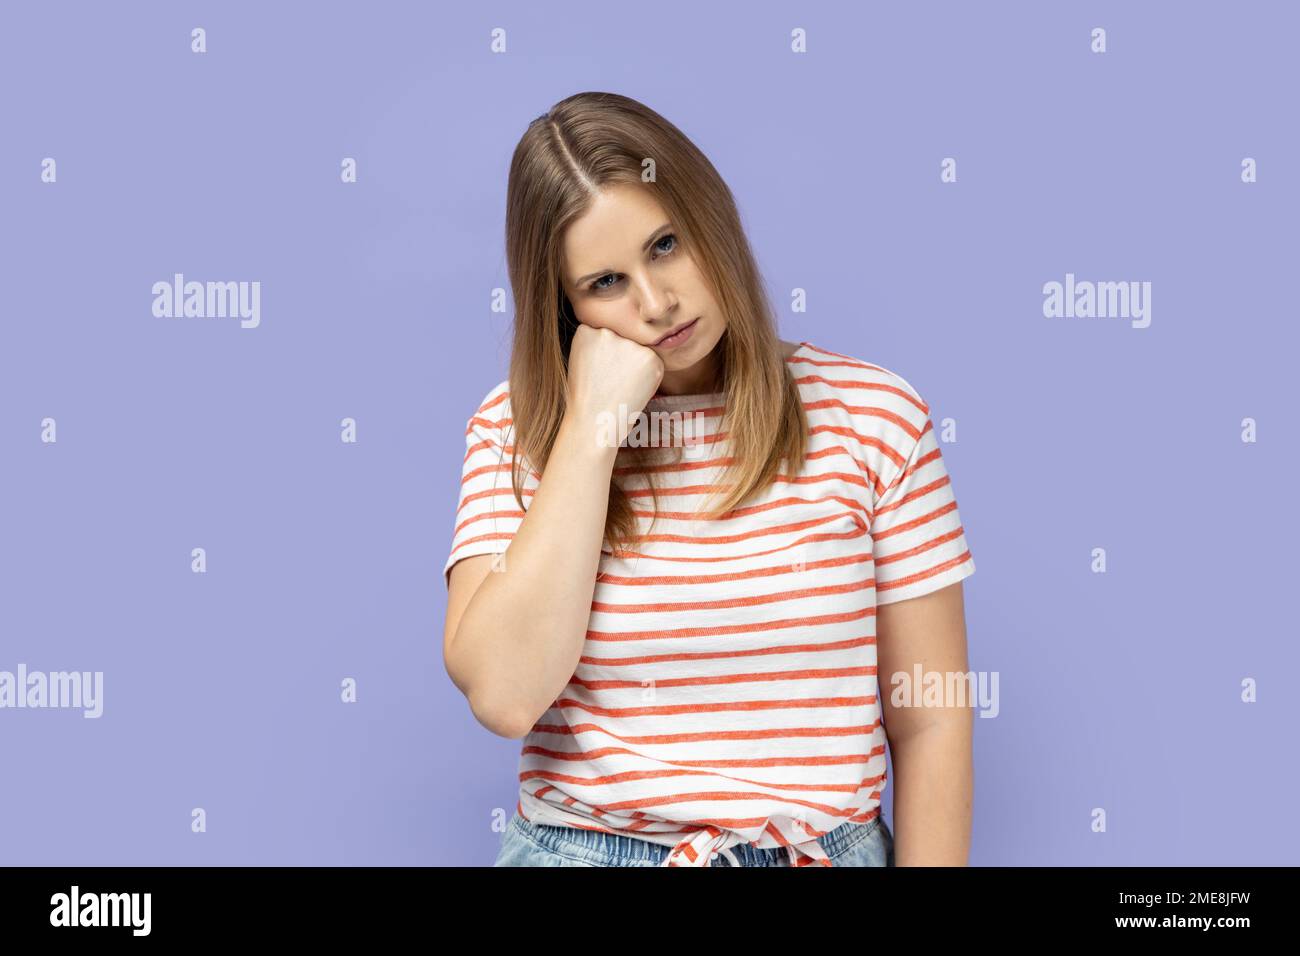 Unhappy depressed blond woman feeling bored with tedious conversation, feels disinterest and apathy, indifferent to life, lack of energy. Indoor studio shot isolated on purple background. Stock Photo